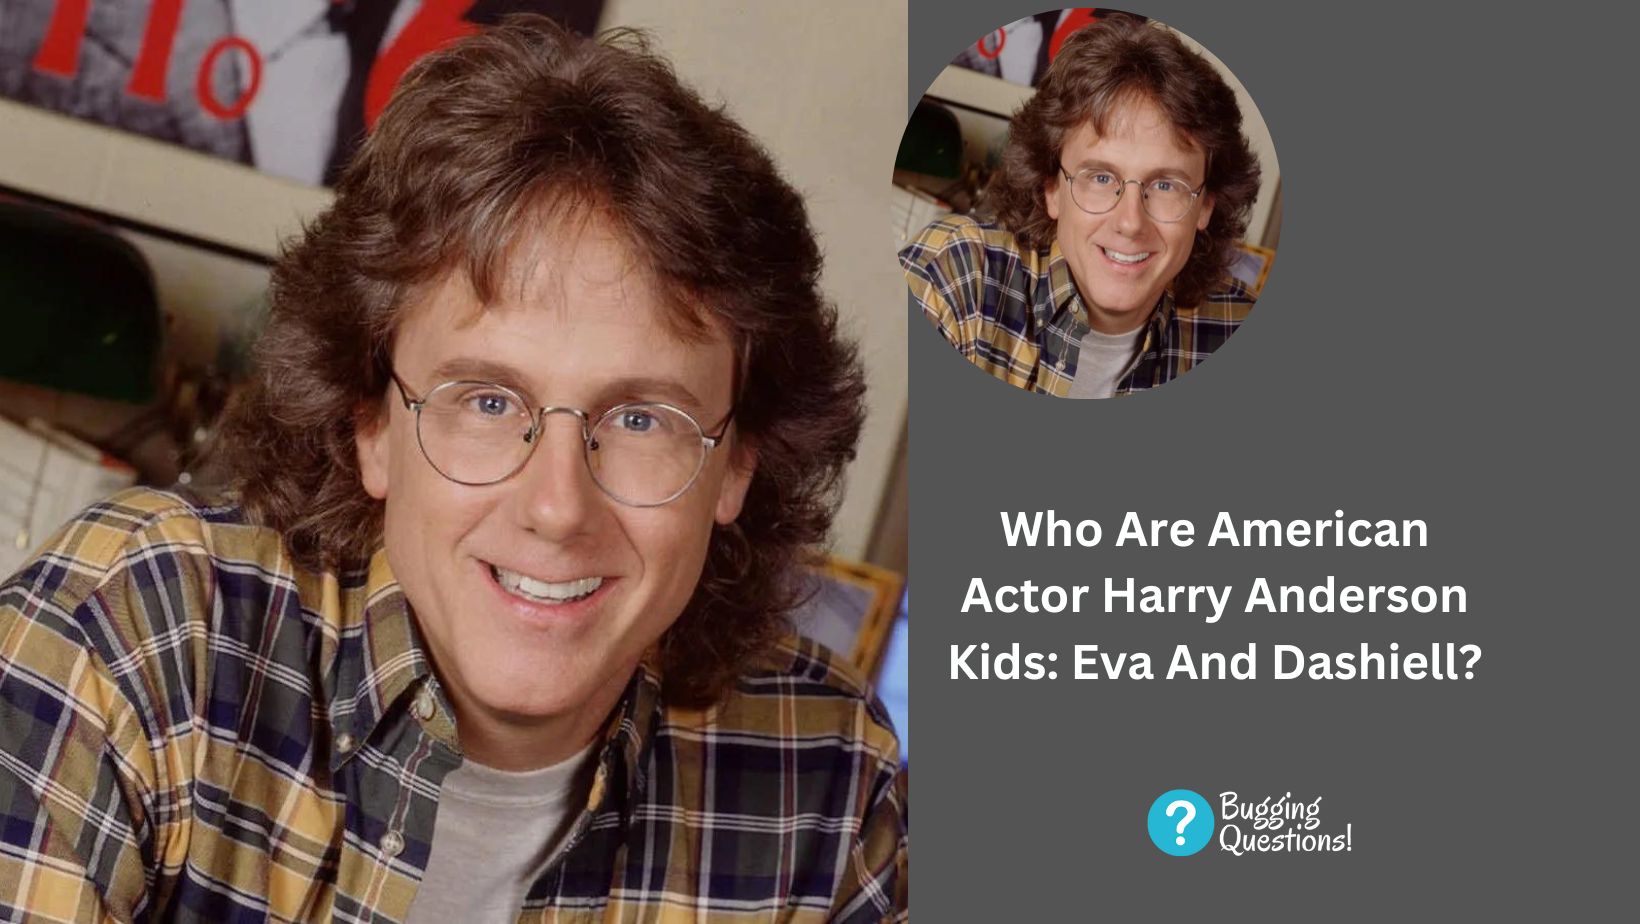 Who Are American Actor Harry Anderson Kids: Eva And Dashiell?